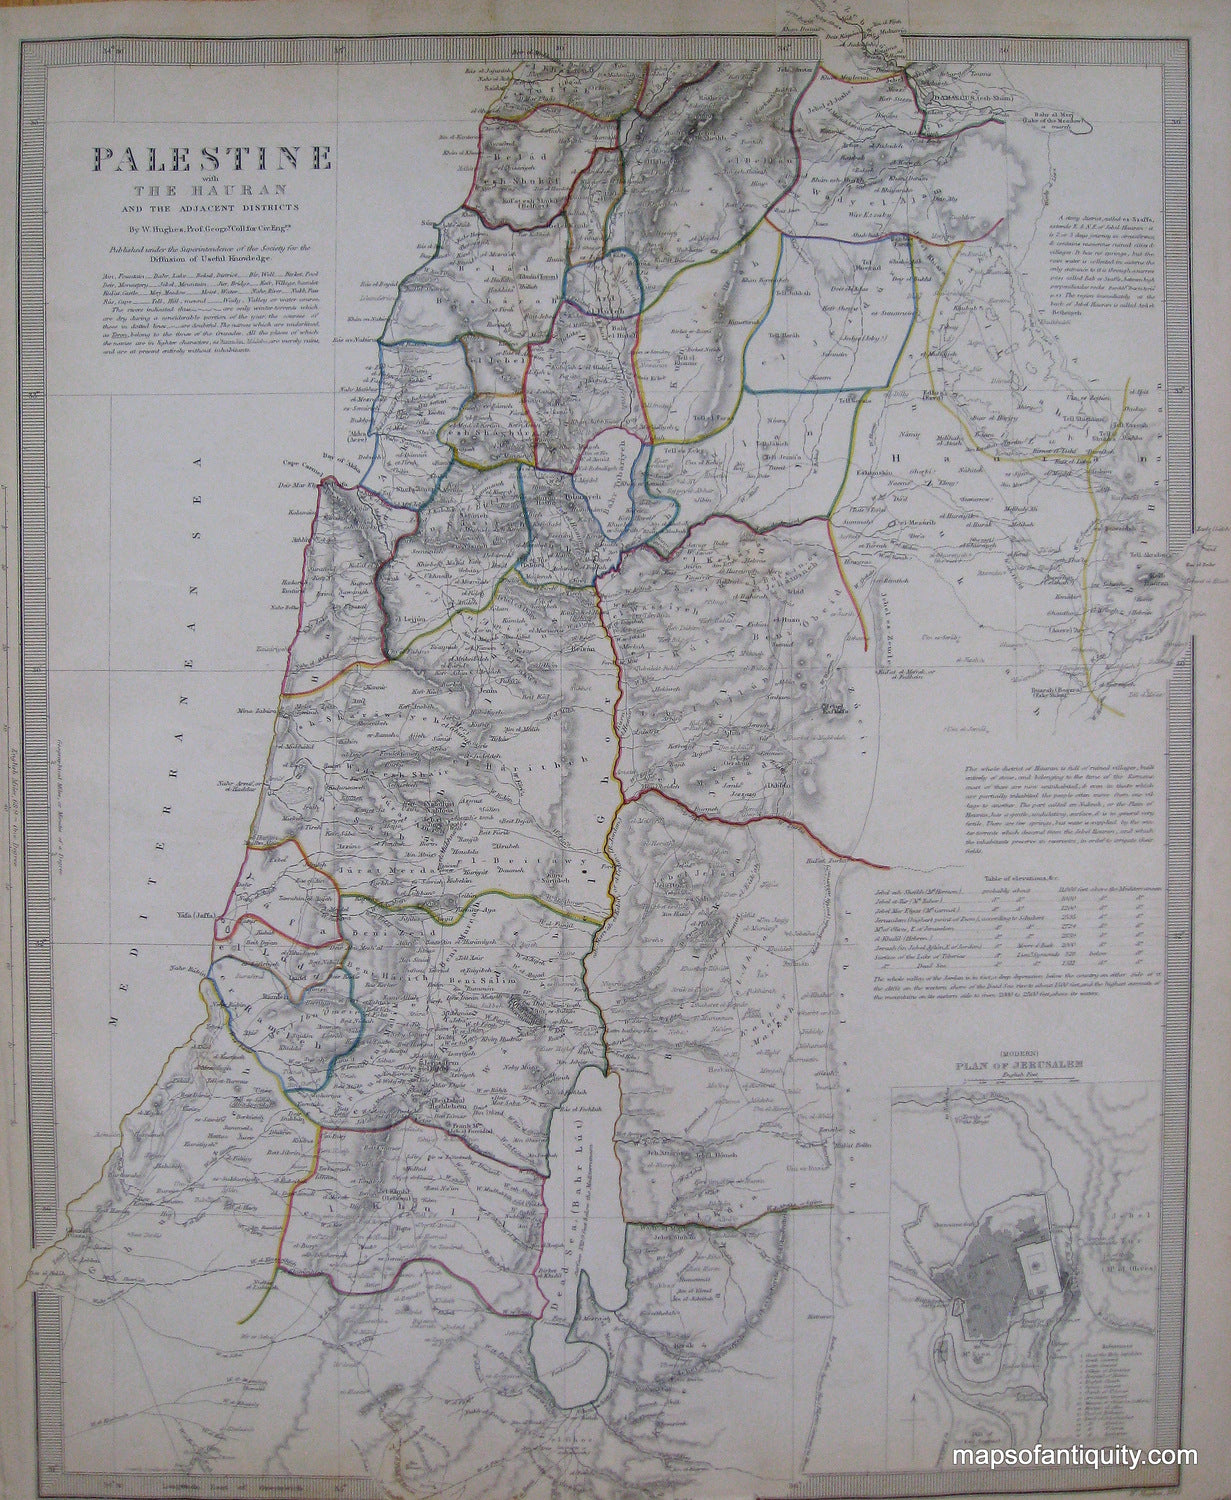 Antique-Hand-Colored-Map-Palestine-with-the-Hauran-and-the-Adjacent-Districts-**********-Middle-East-and-Holy-Land-Palestine-1843-SDUK/-Society-for-the-Diffusion-of-Useful-Knowledge-Maps-Of-Antiquity